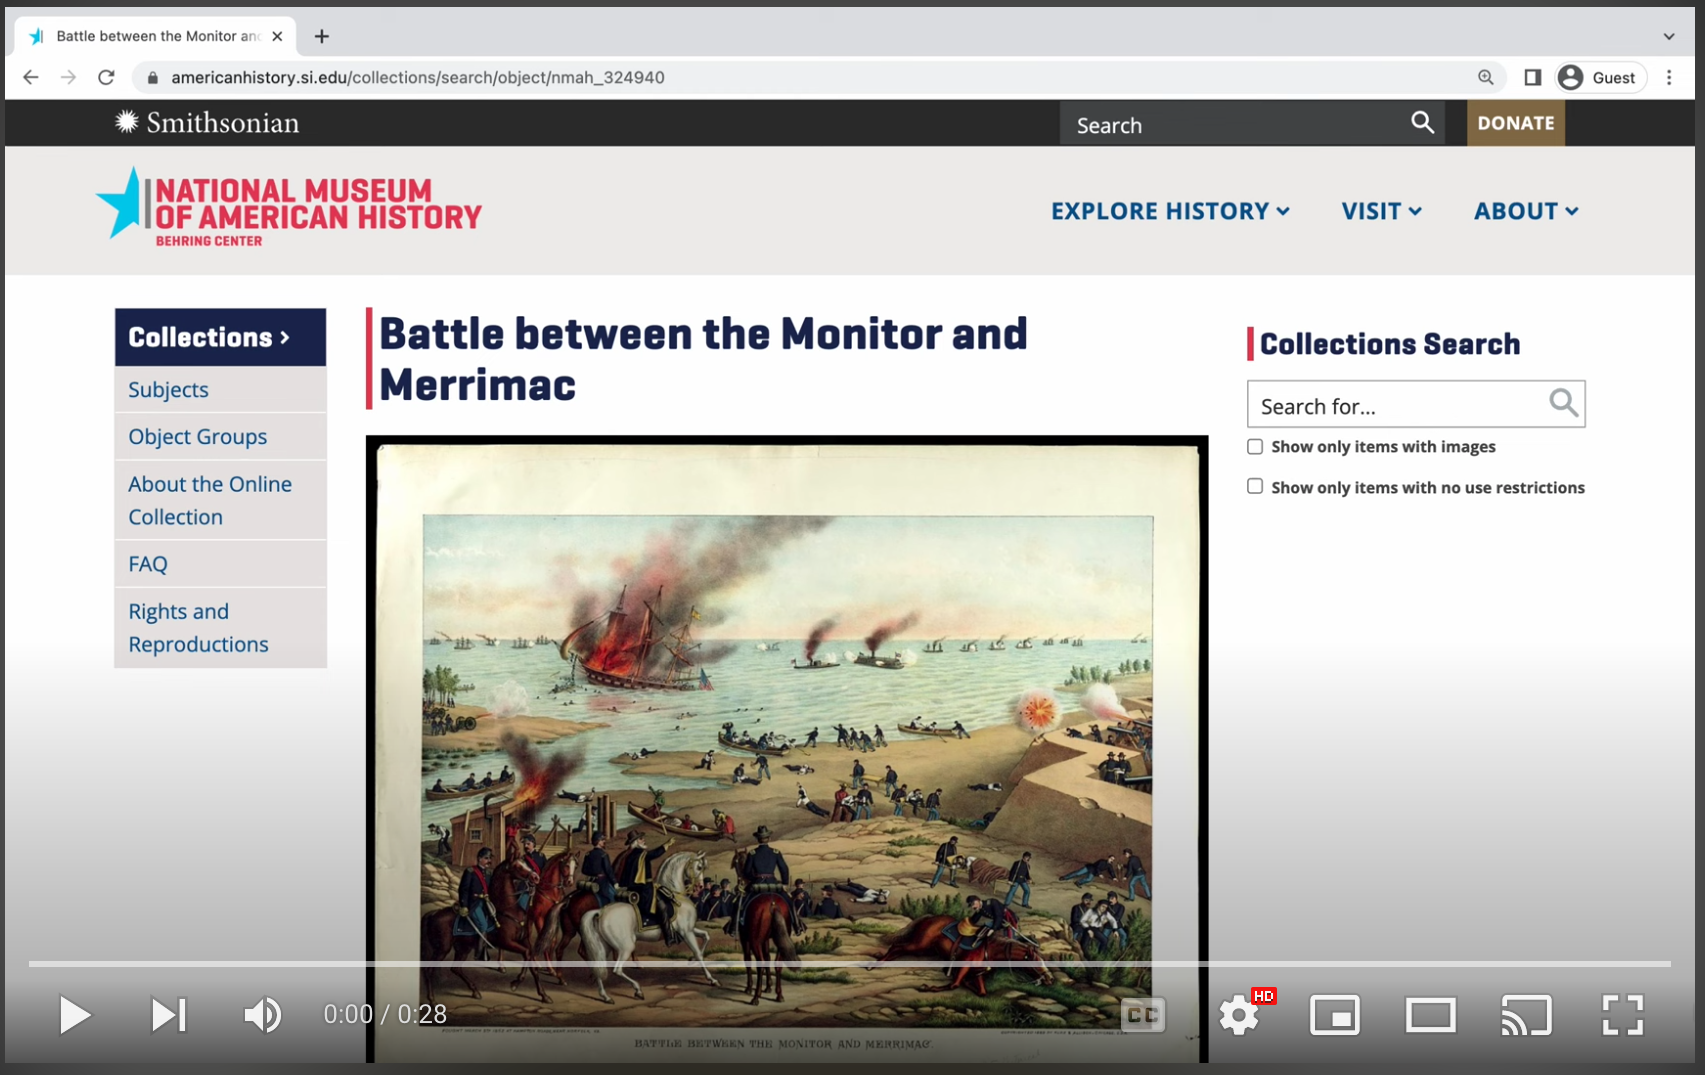 Magnification of the “Battle between the Monitor and Merrimac” webpage from 100 percent to 200 percent. Magnification causes the text and text boxes to expand, and, at 150 percent, the three vertical lines of content to shift to 1 line.